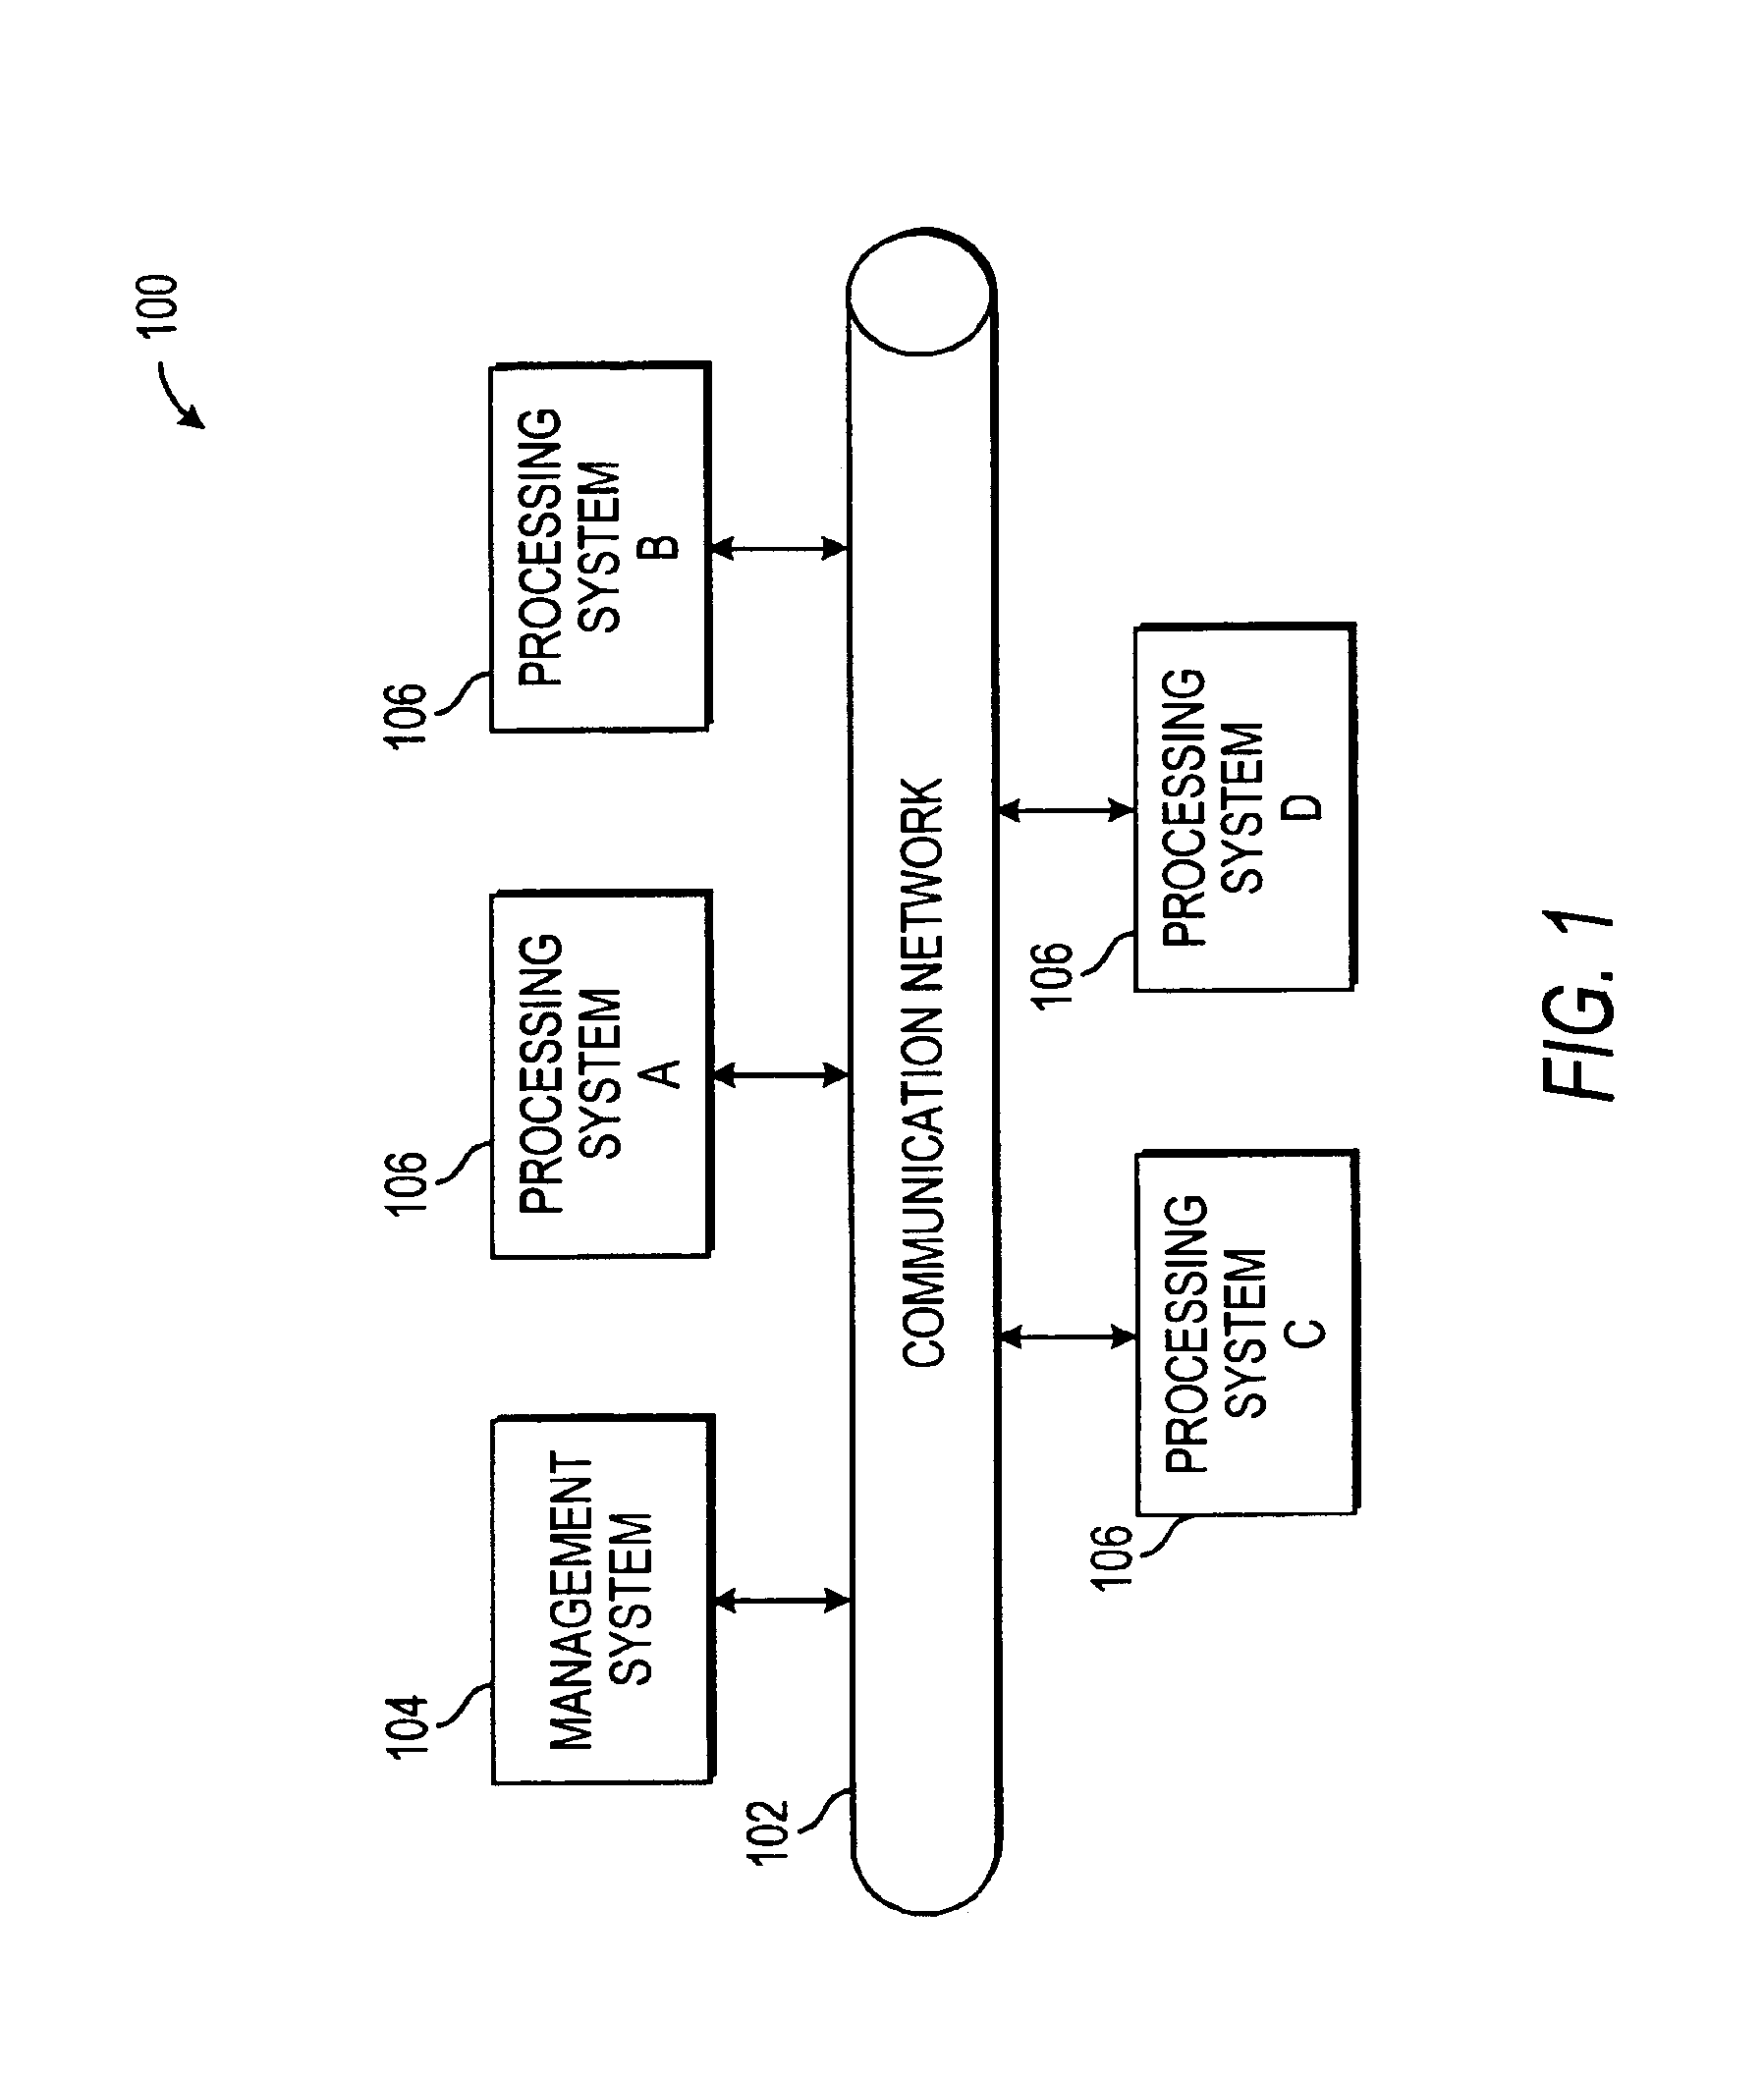 System and method for communicating data